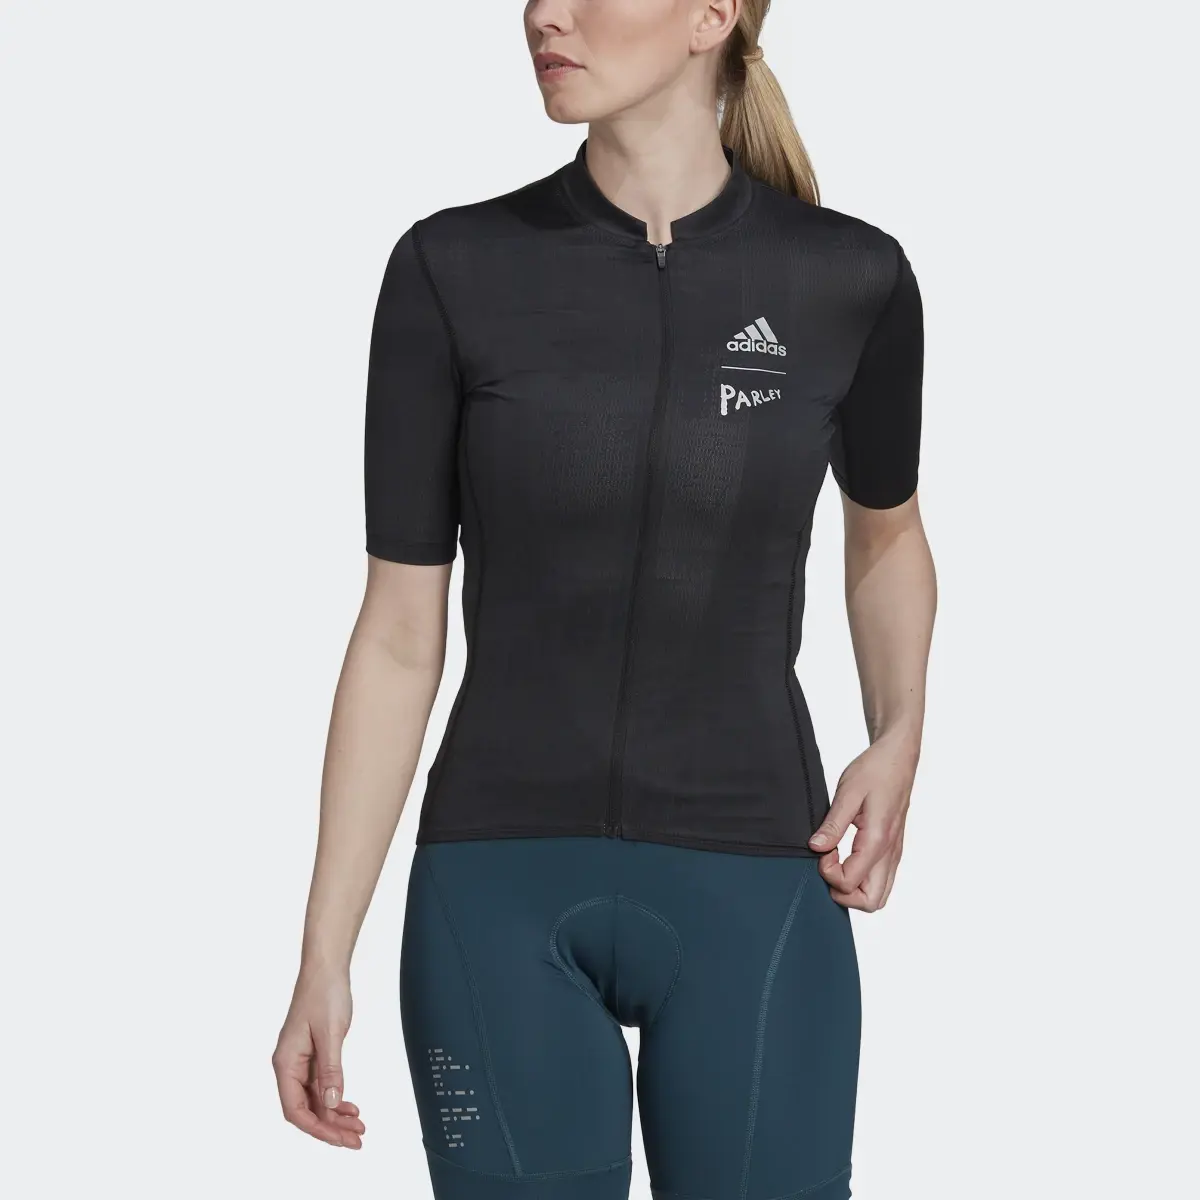 Adidas The Parley Short Sleeve Cycling Jersey. 1